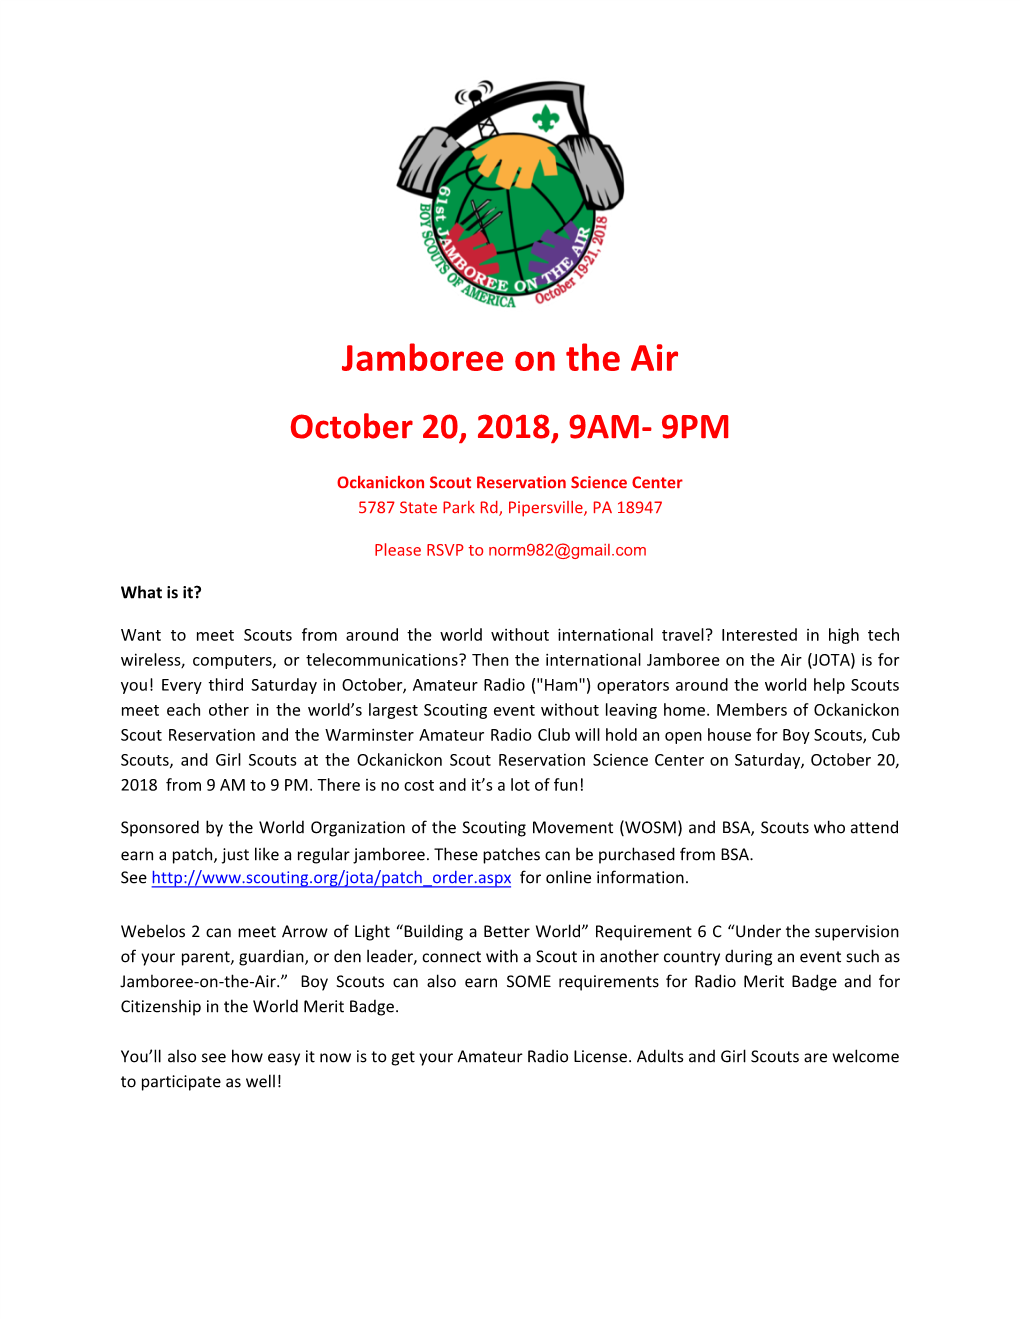 Jamboree on the Air October 20, 2018, 9AM- 9PM